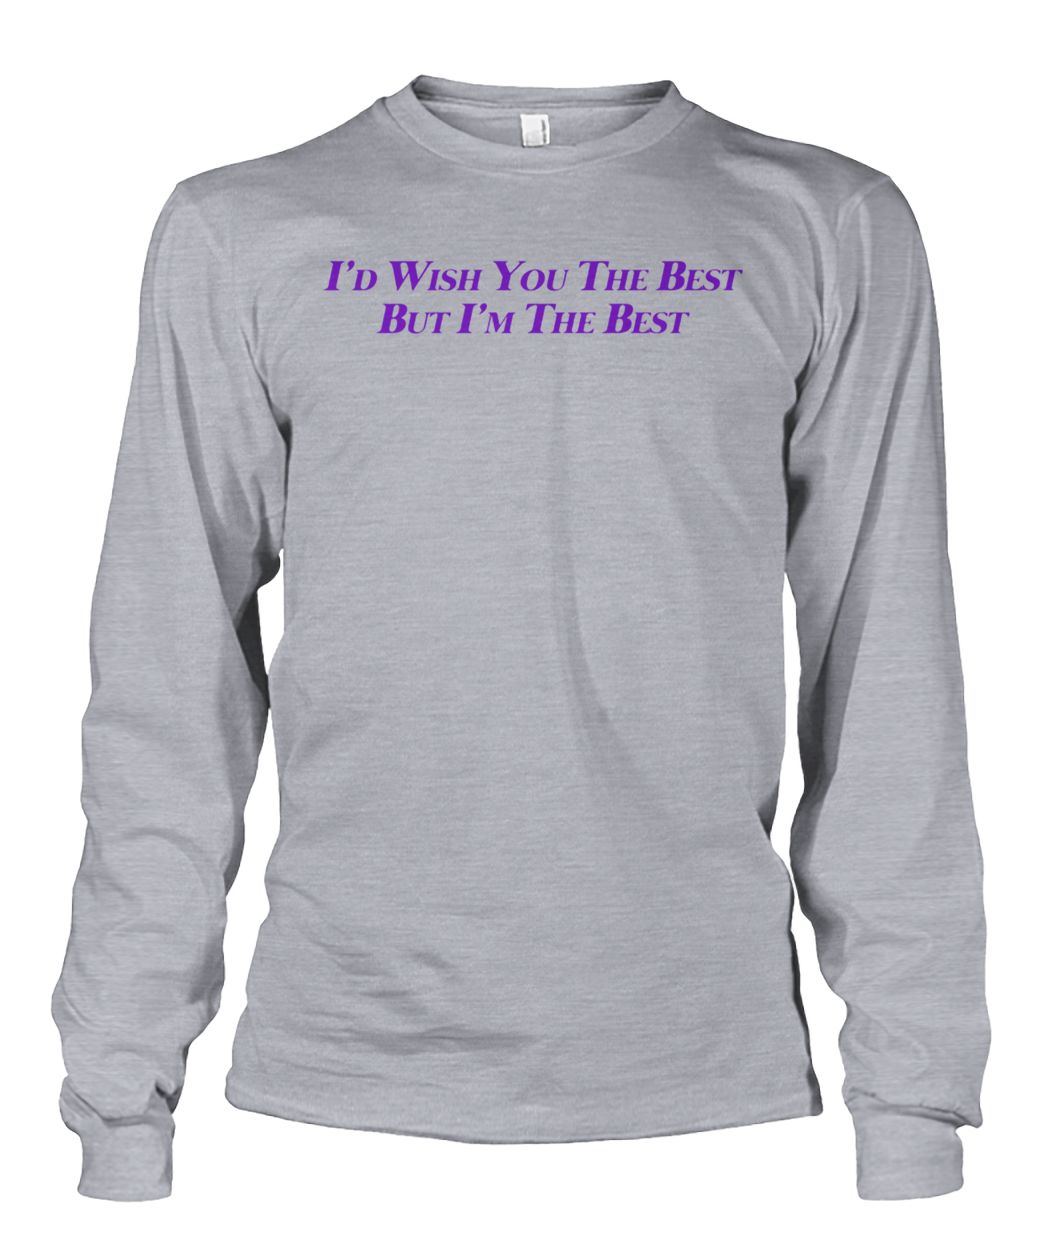 I'd wish you the best but I'm the best unisex long sleeve